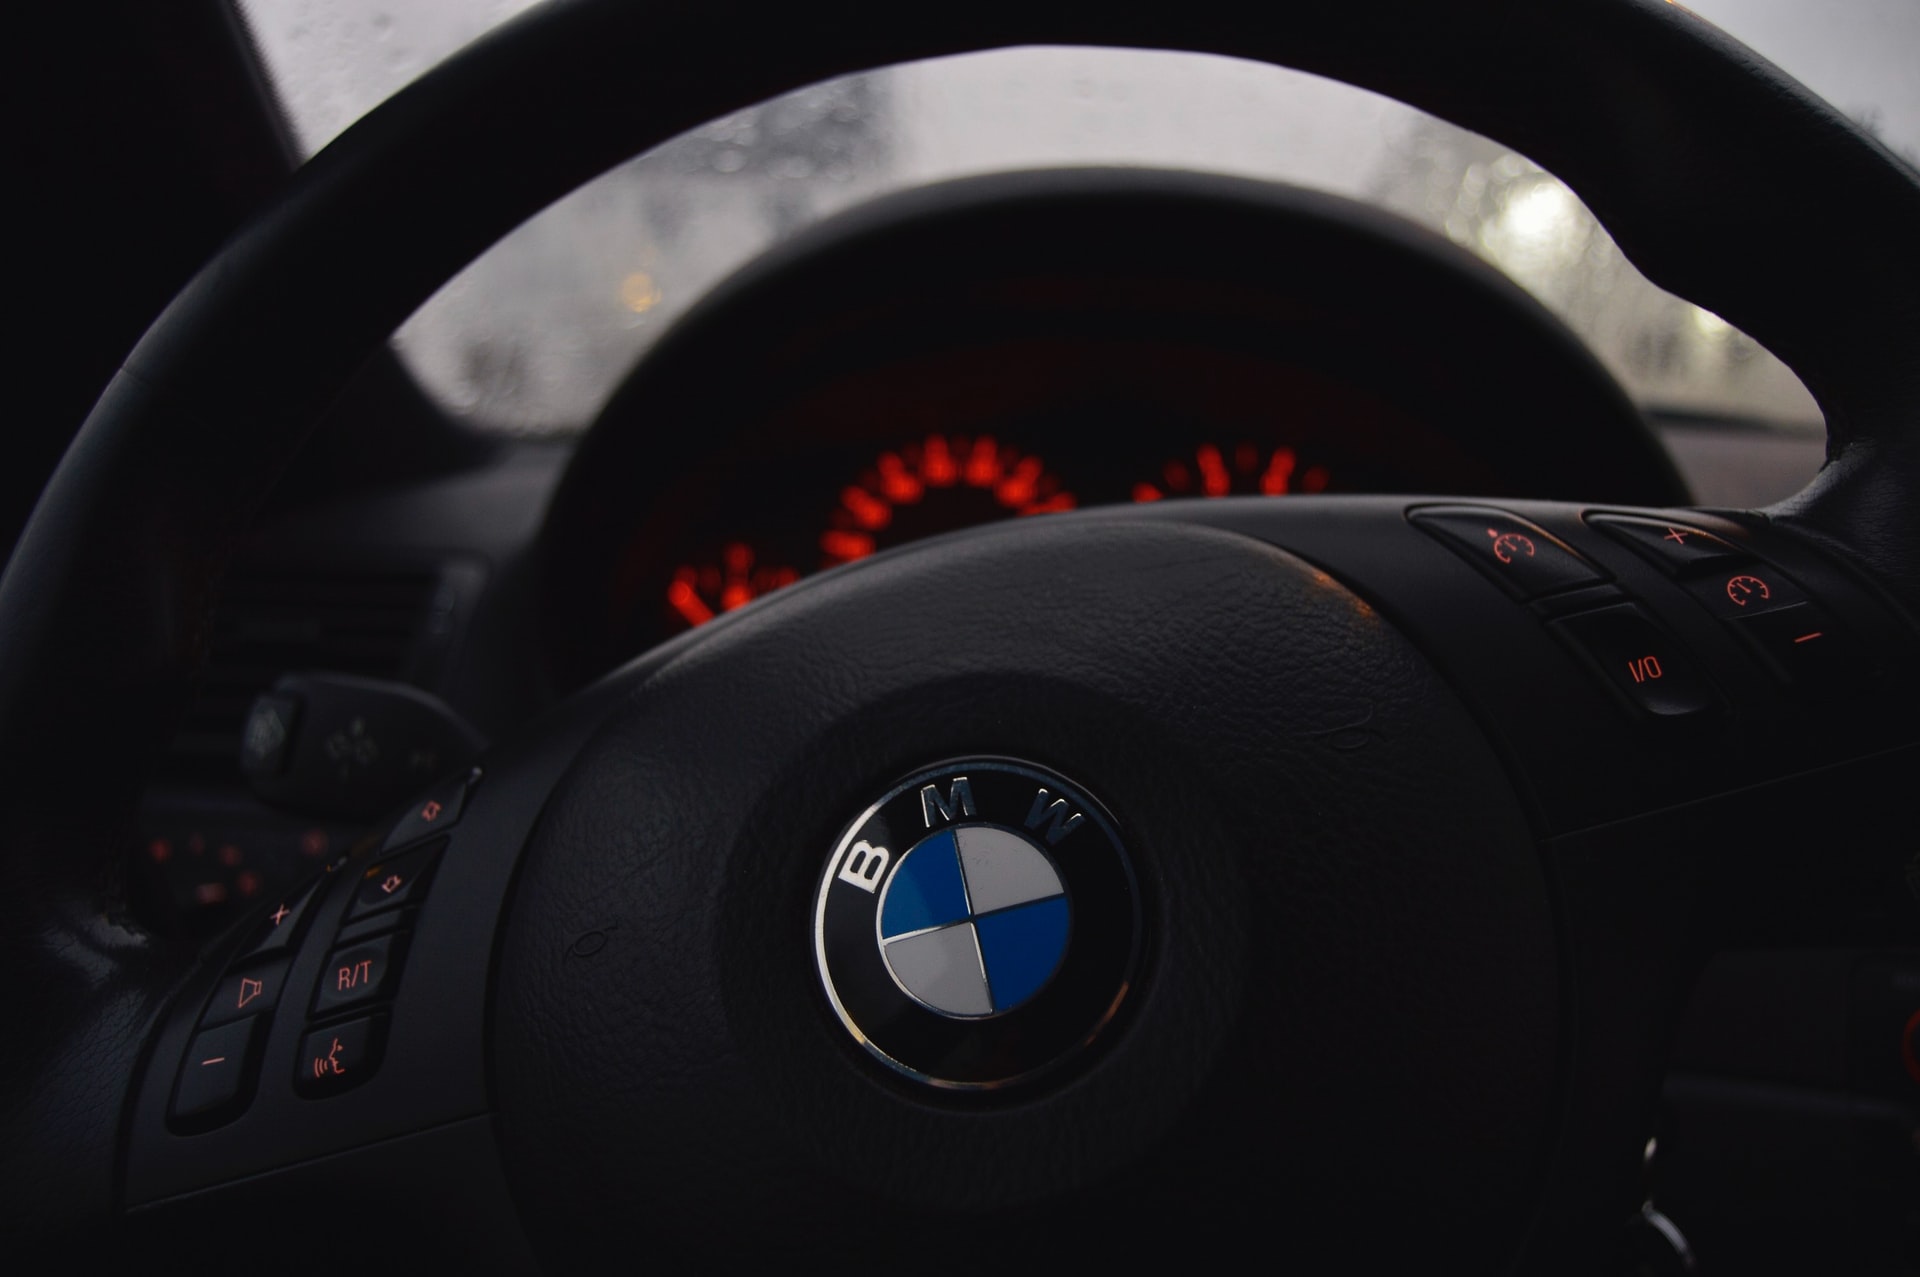 Guide to BMW Warning Lights: What Do They Mean?